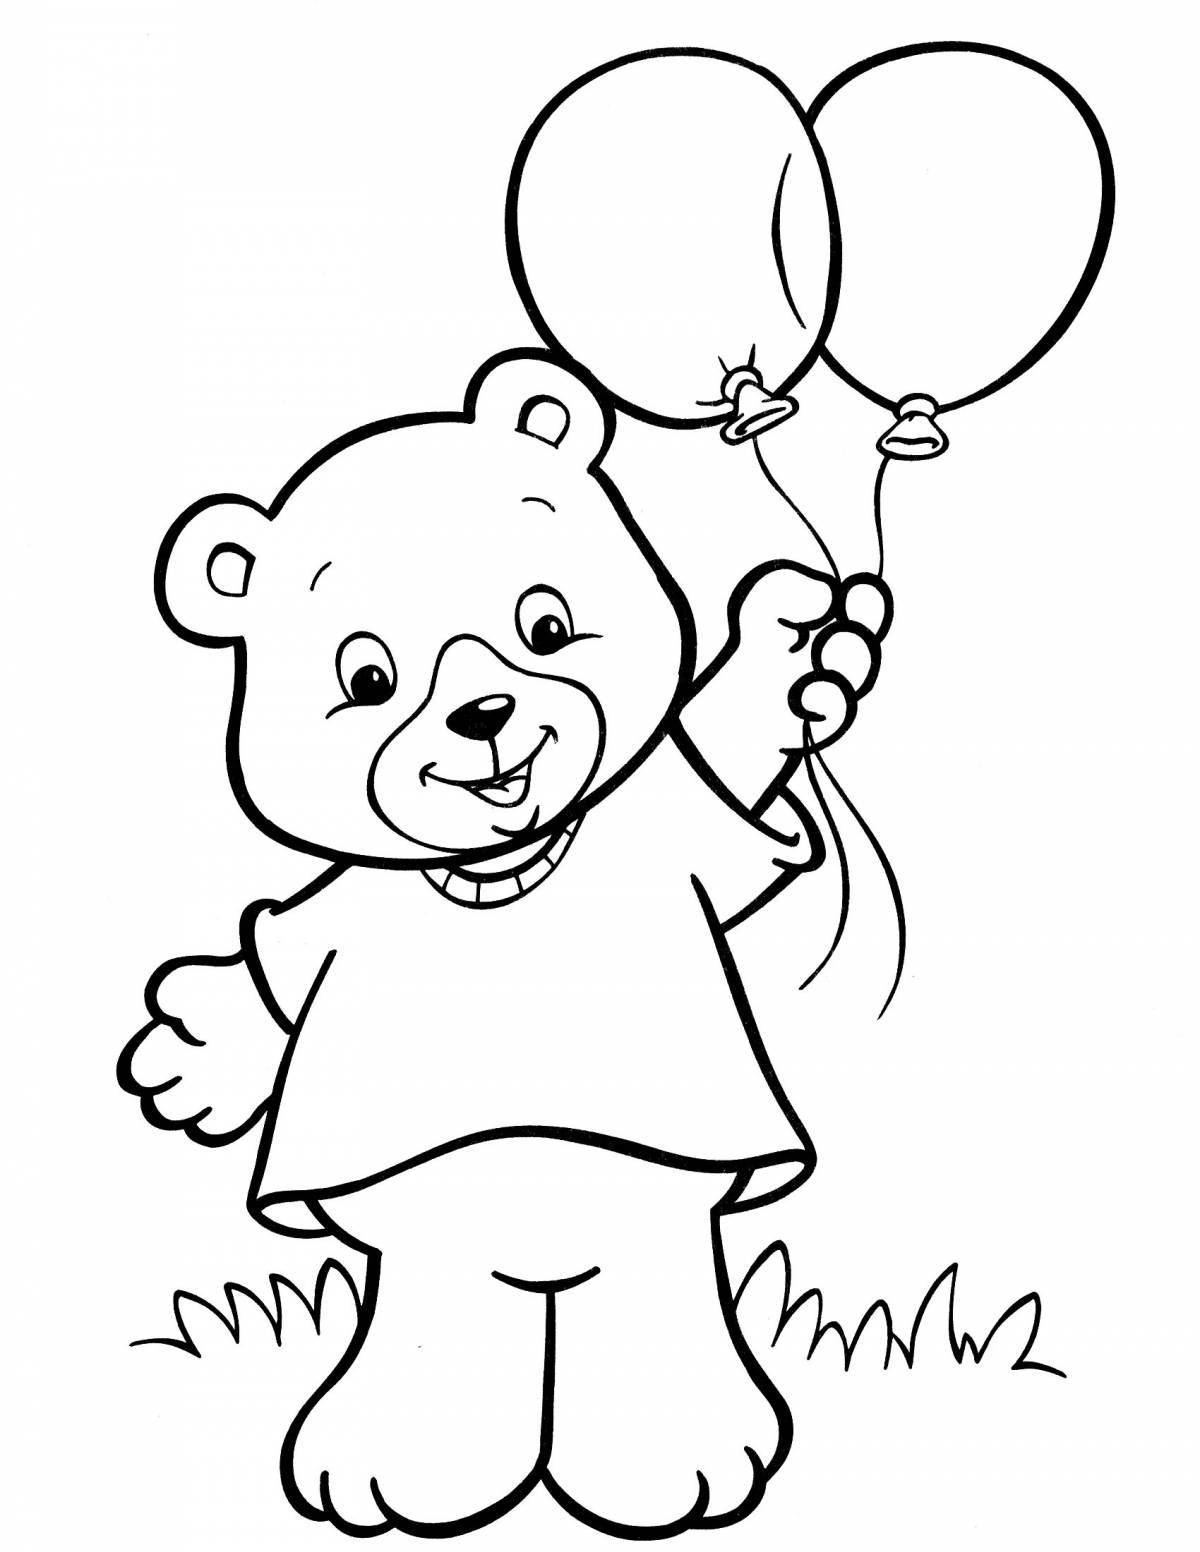 Coloring photo for kids